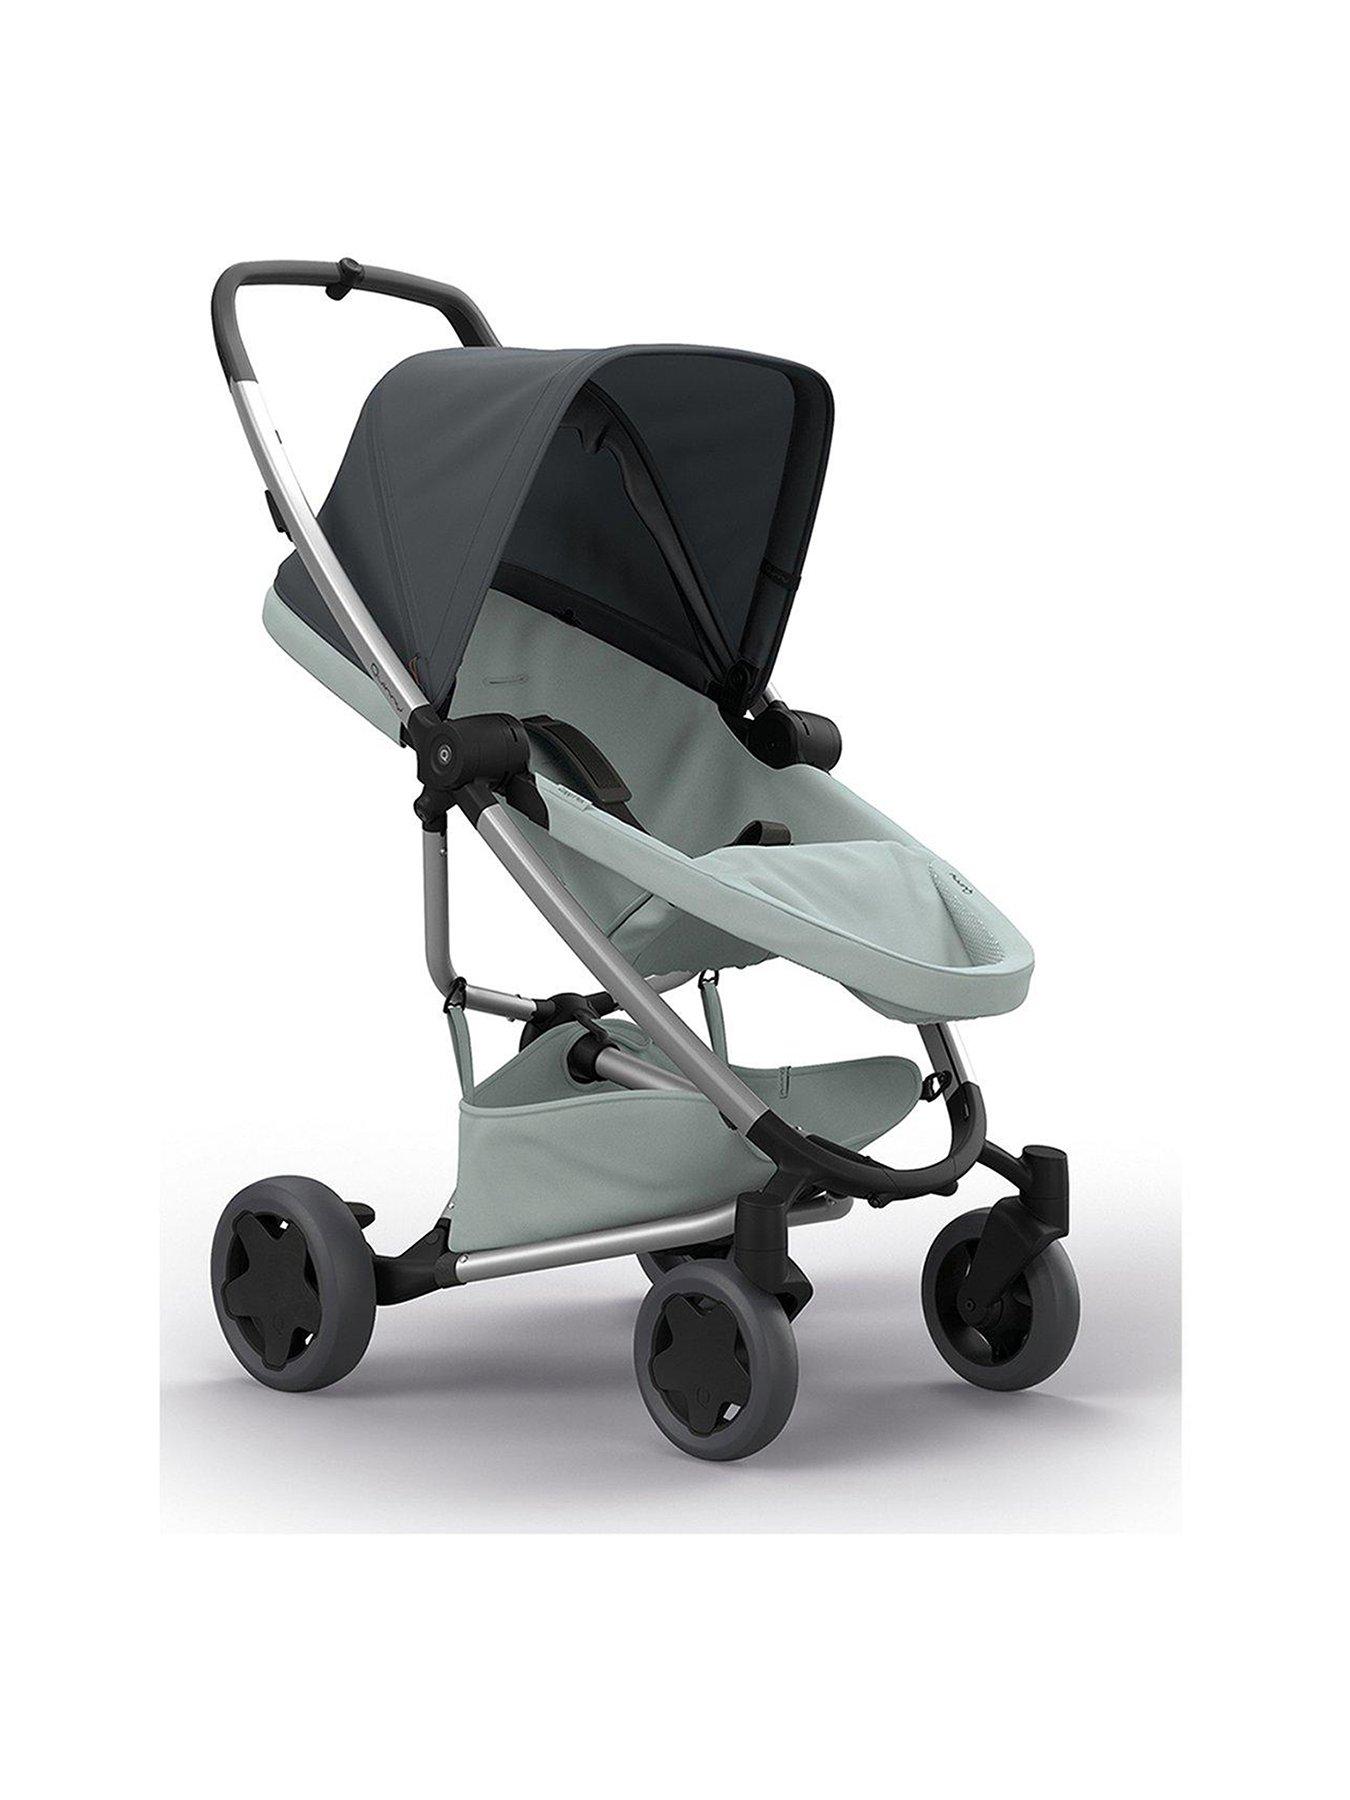 pushchair for 6 month old